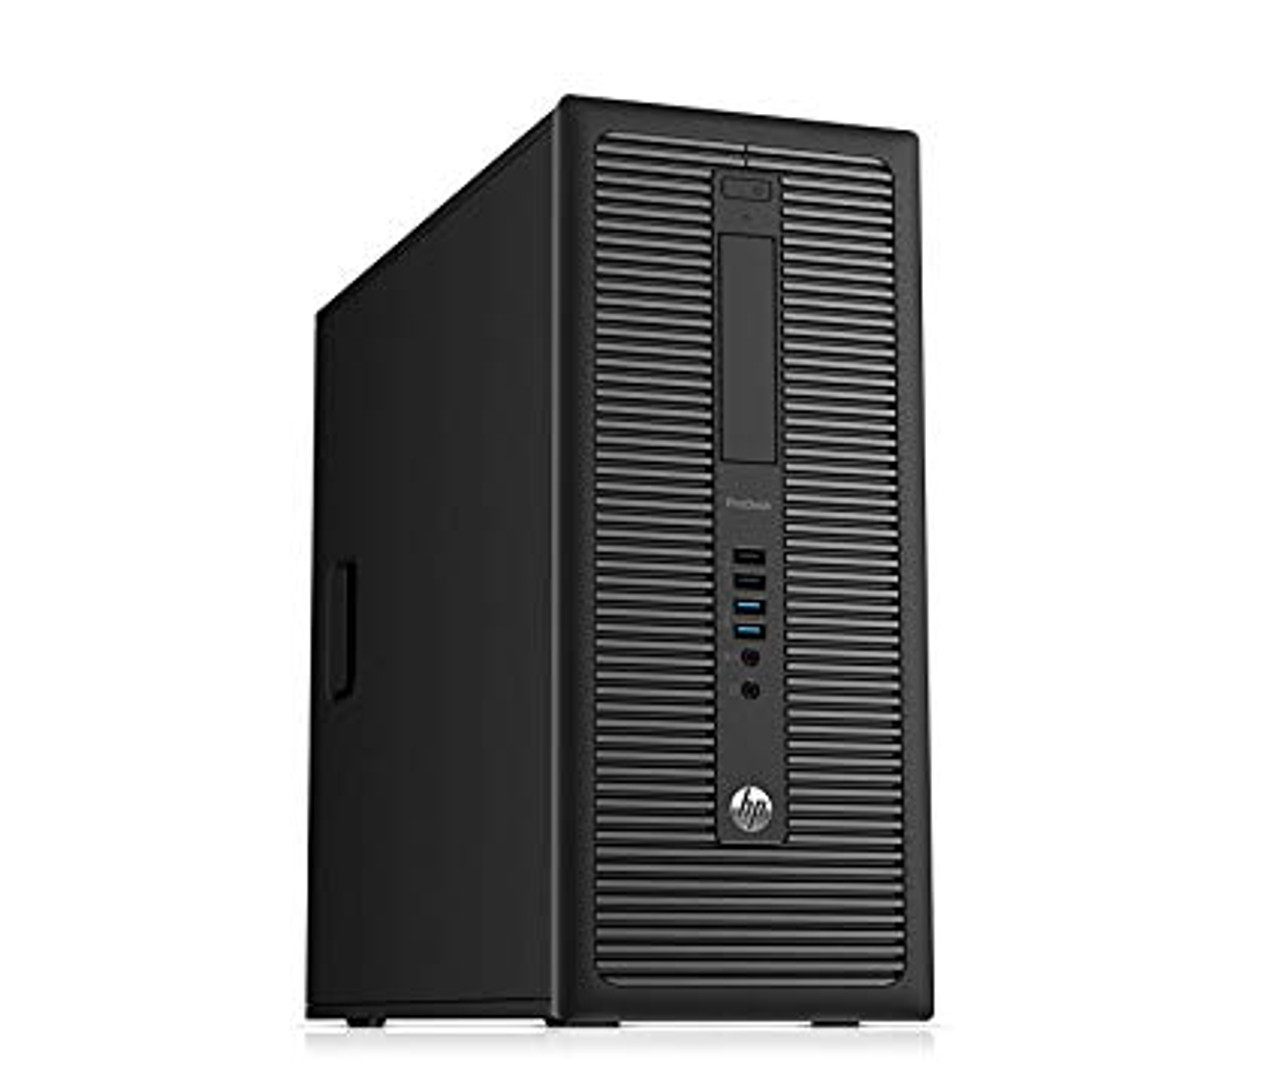 Fast and Dependable HP ProDesk 600 G1 Tower Computer | Intel Core i5 | 8GB  RAM | 128GB SSD | Windows 10 Pro | Keyboard | Mouse | WiFi